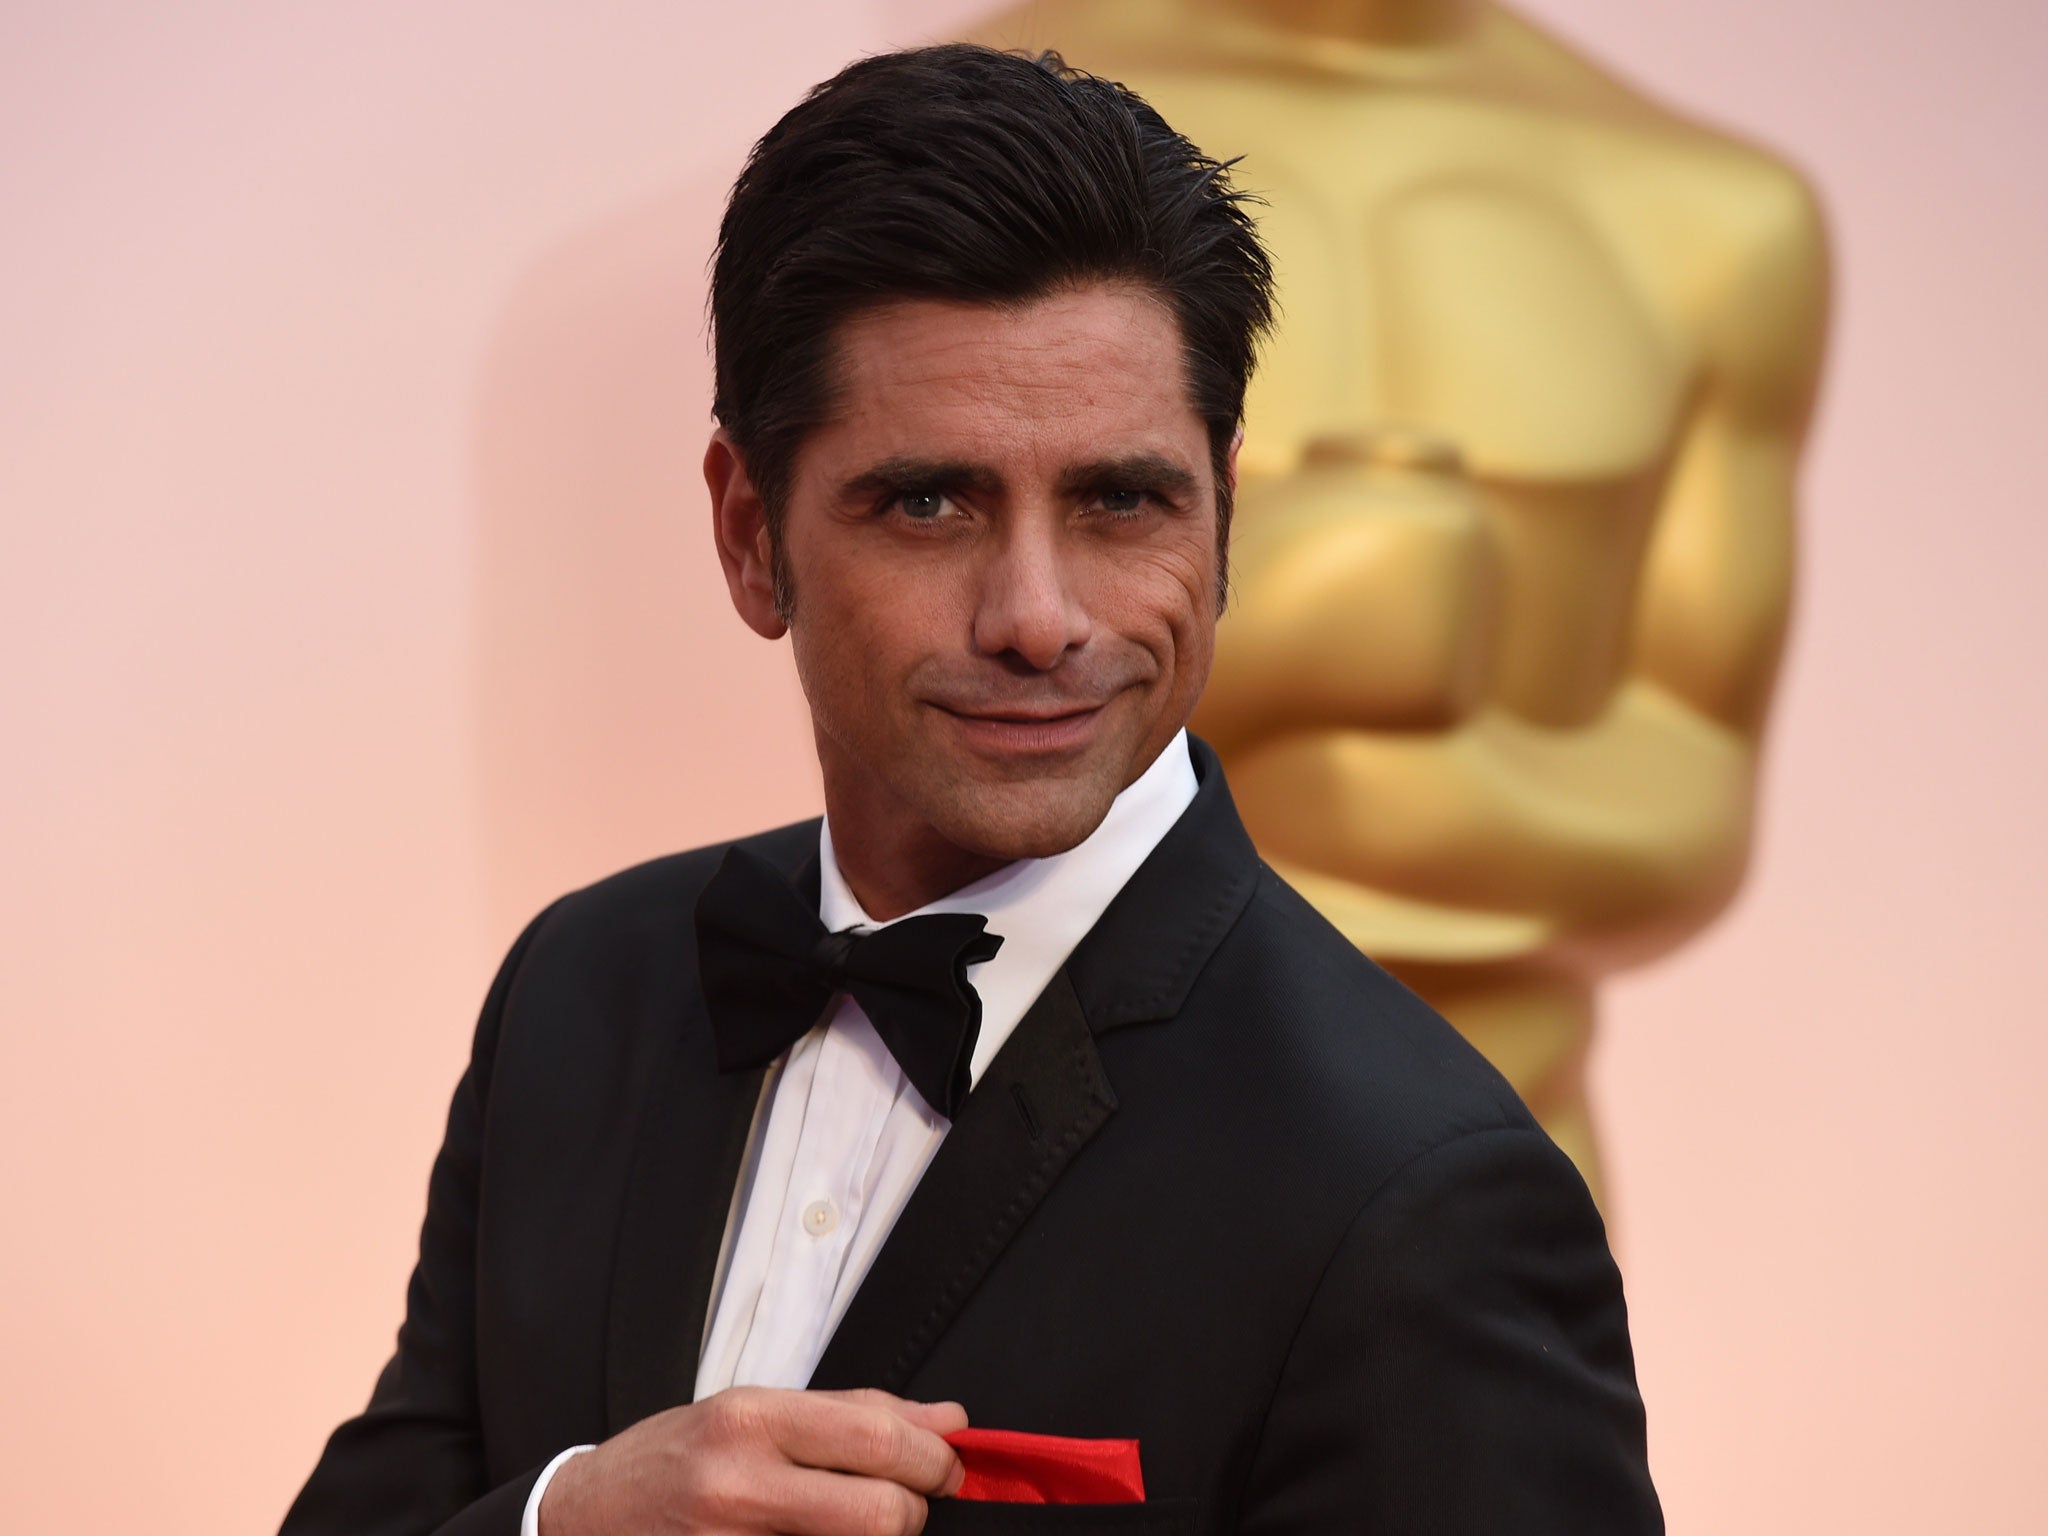 John Stamos Full House Actor Charged With Driving Under The Influence